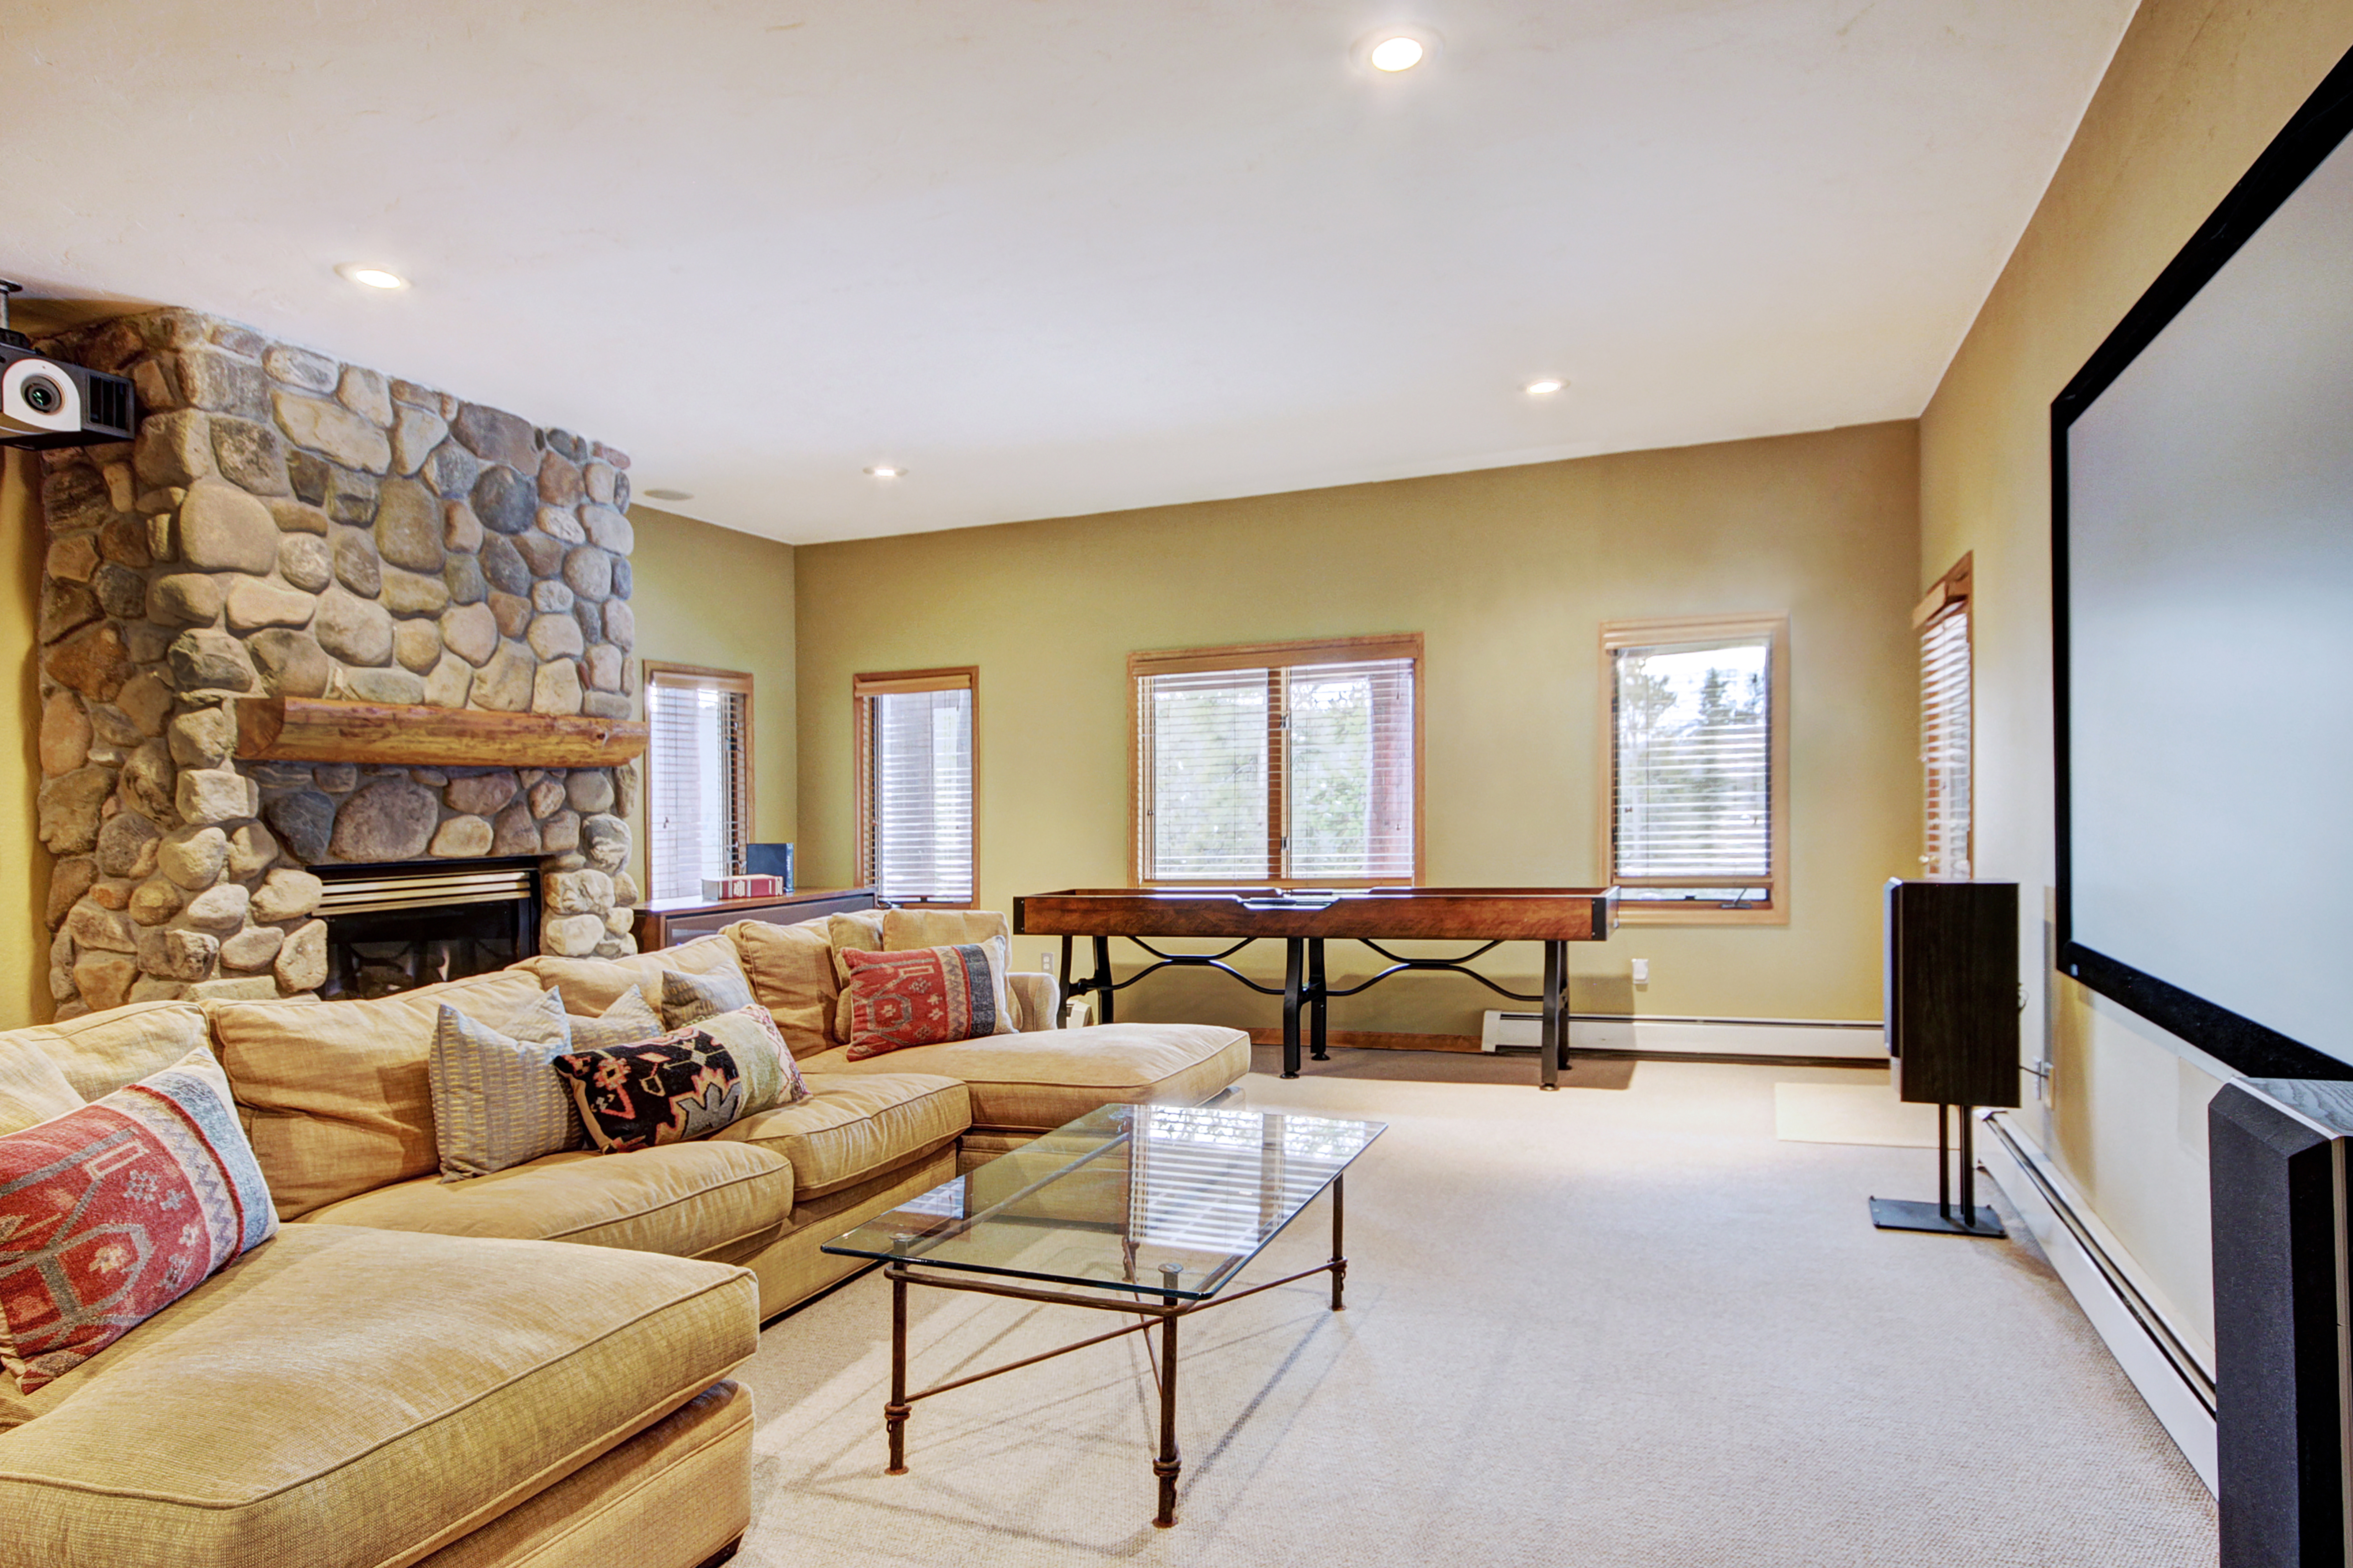 Enjoy the projection TV with Blu-ray DVD, Apple TV, Sonos Audio and game table - 10 Southface Breckenridge Vacation Rental